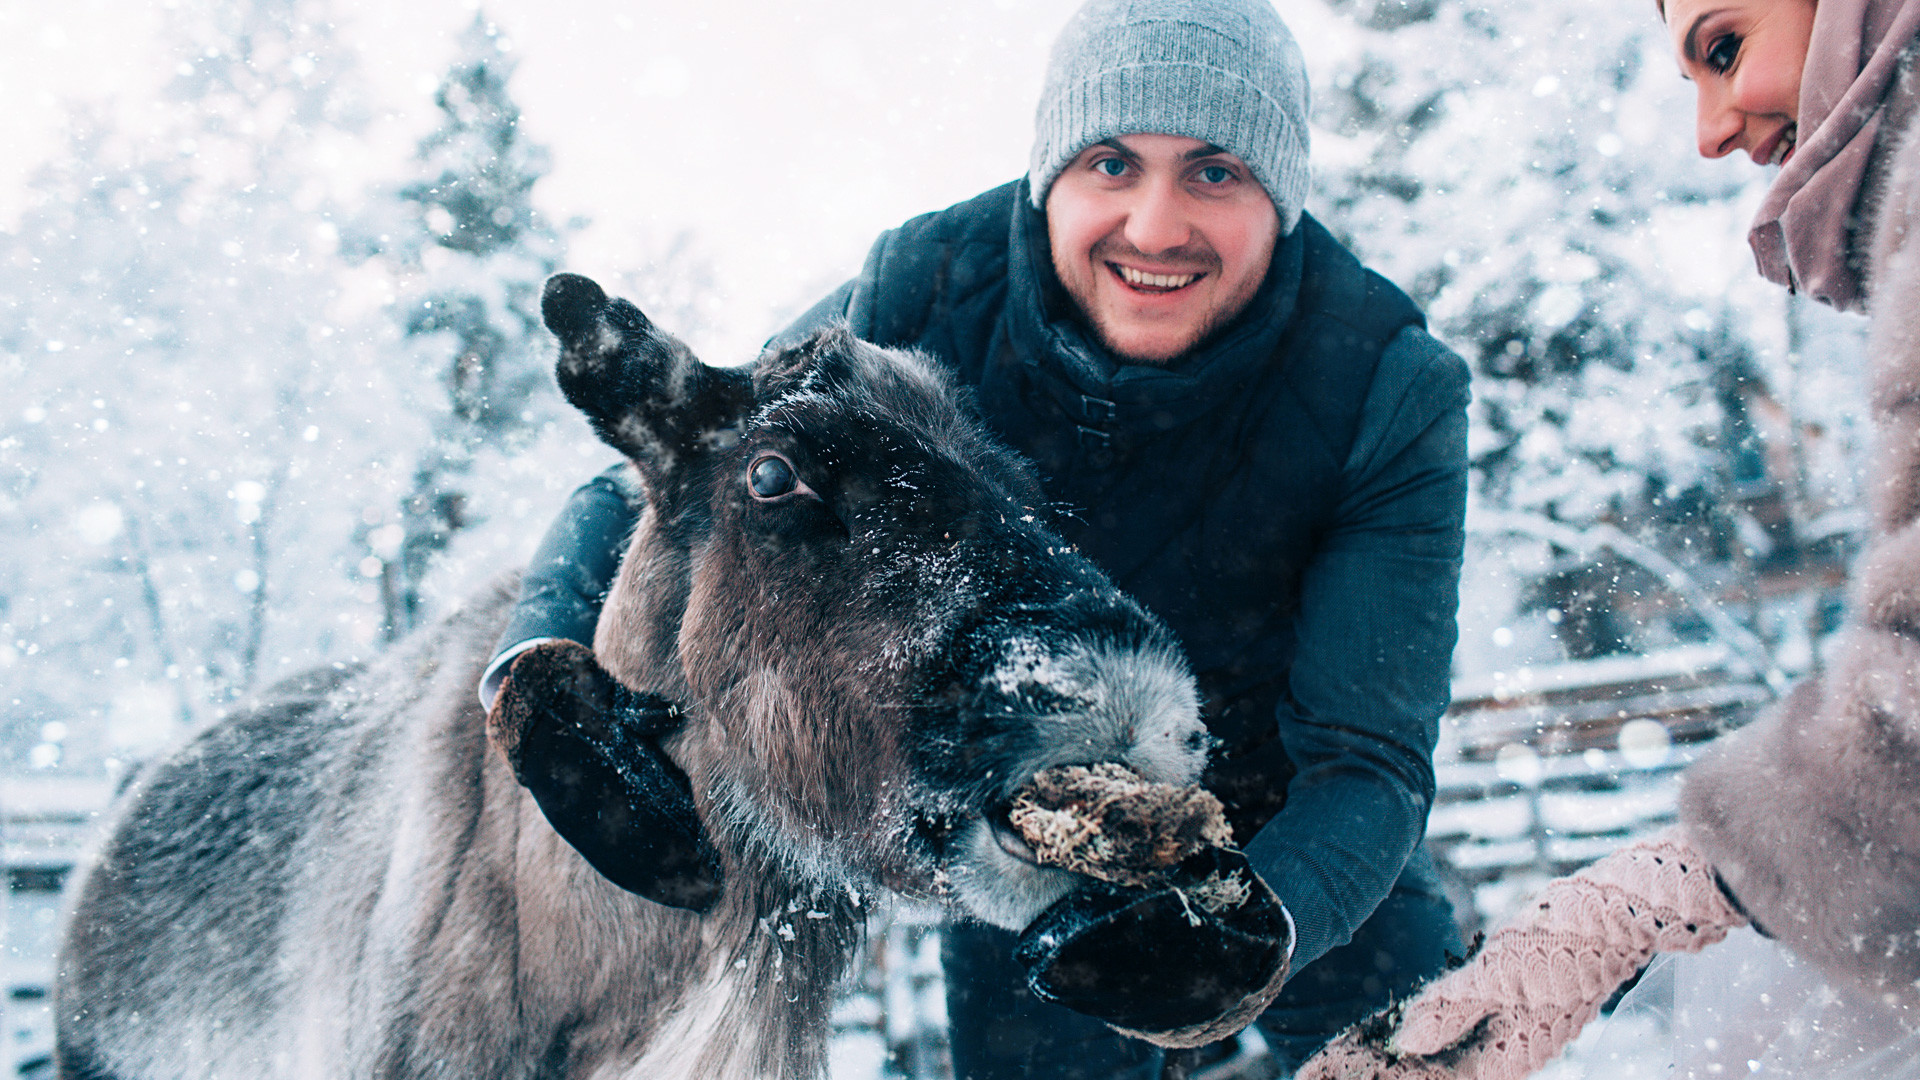 Svetlana and Sergey feed the reindeer at a farm just outside of the Kola Peninsula in Murmansk, Russia